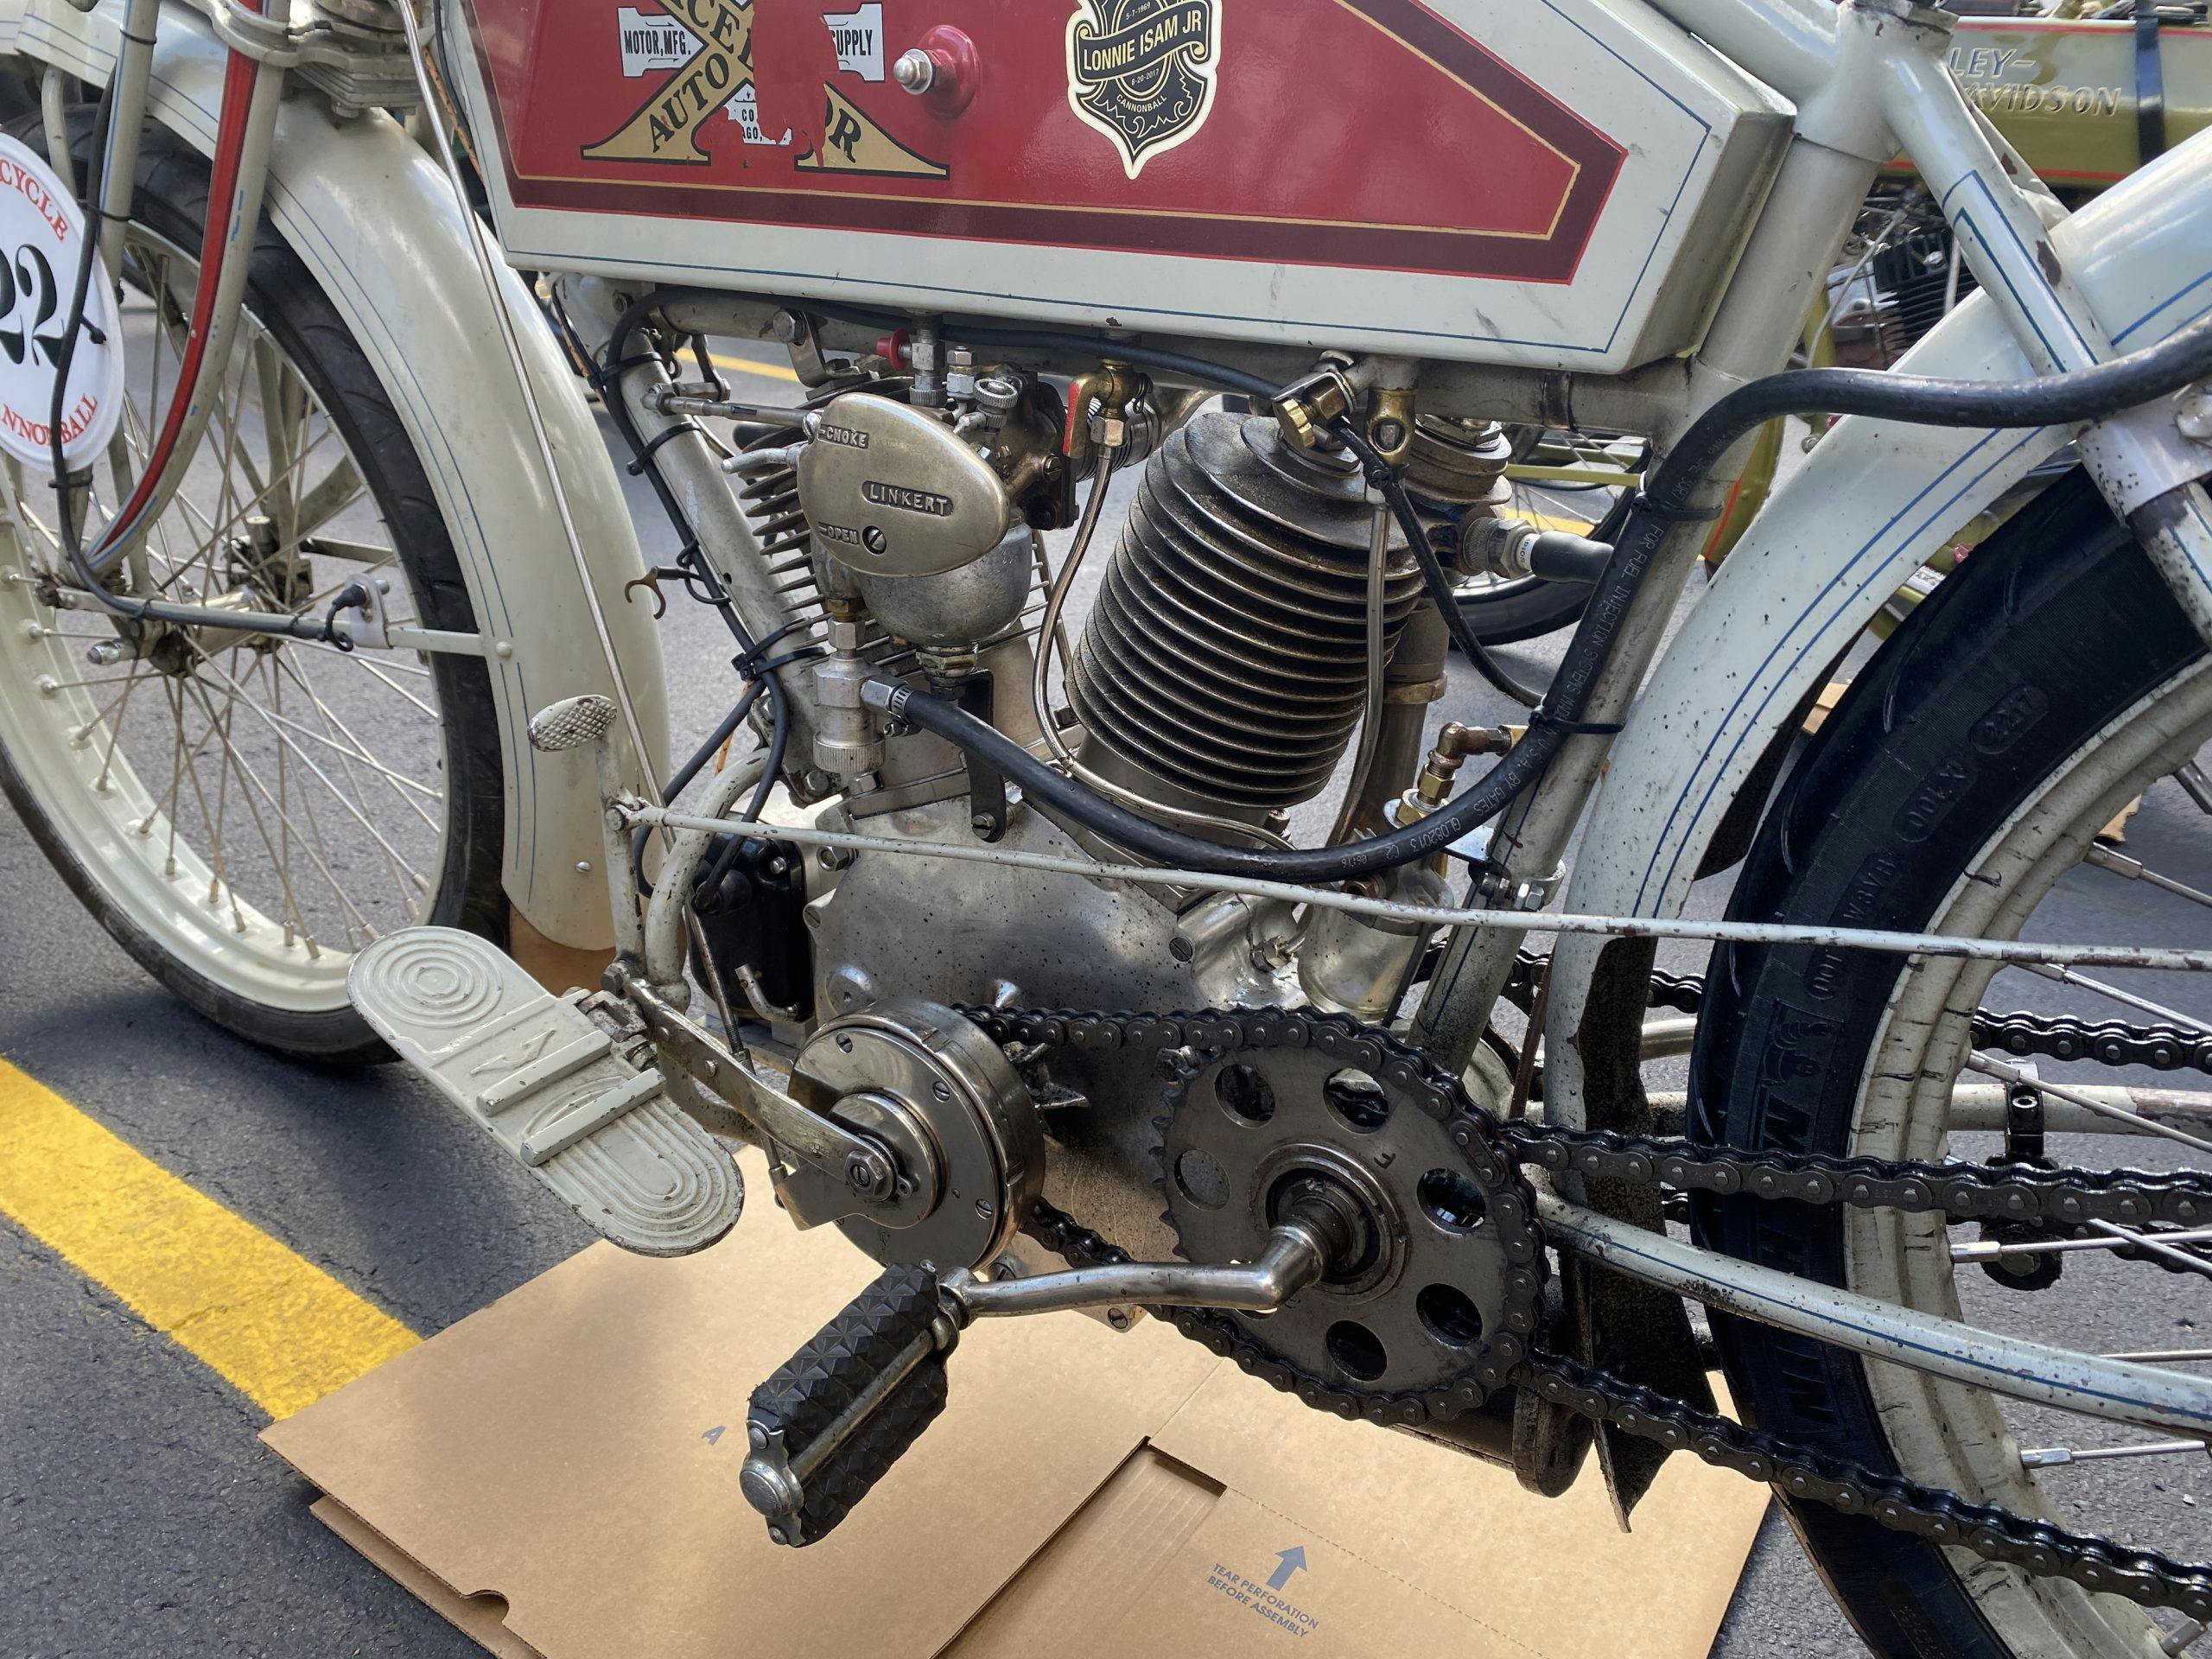 Motorcycle Cannonball engine detail